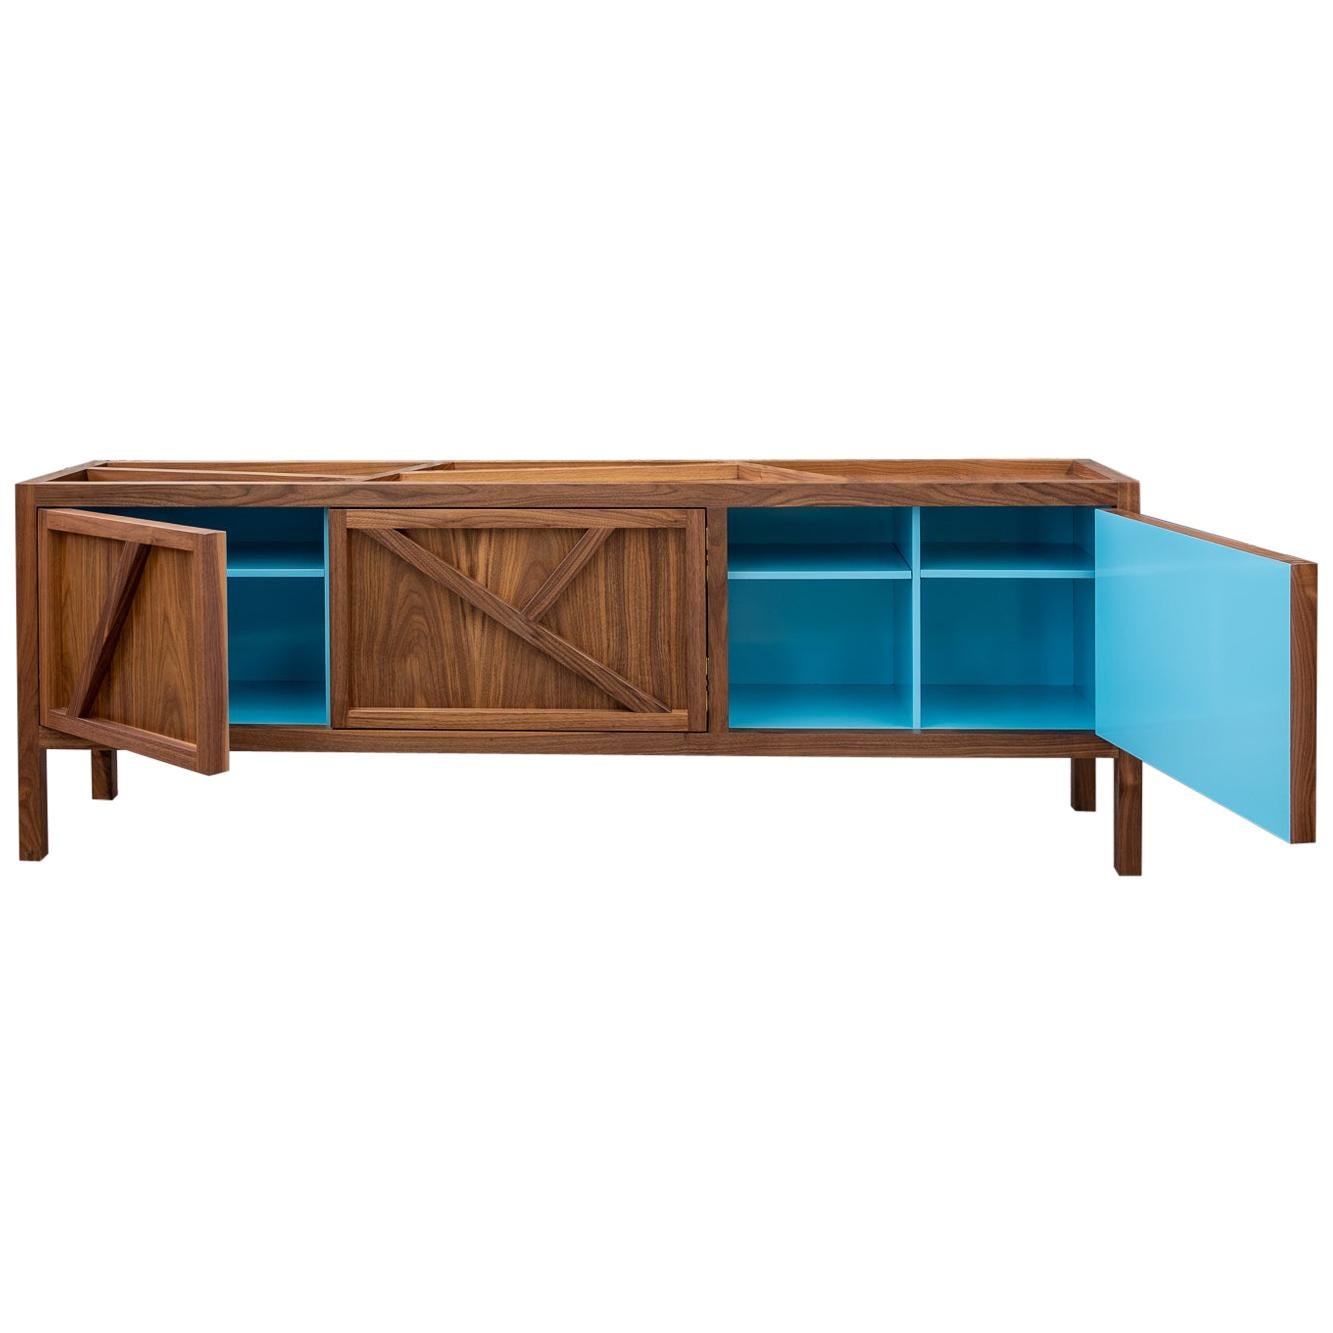 Inside-Out Largo Credenza TV Cabinet, Blue Lacquer interior, Walnut wood